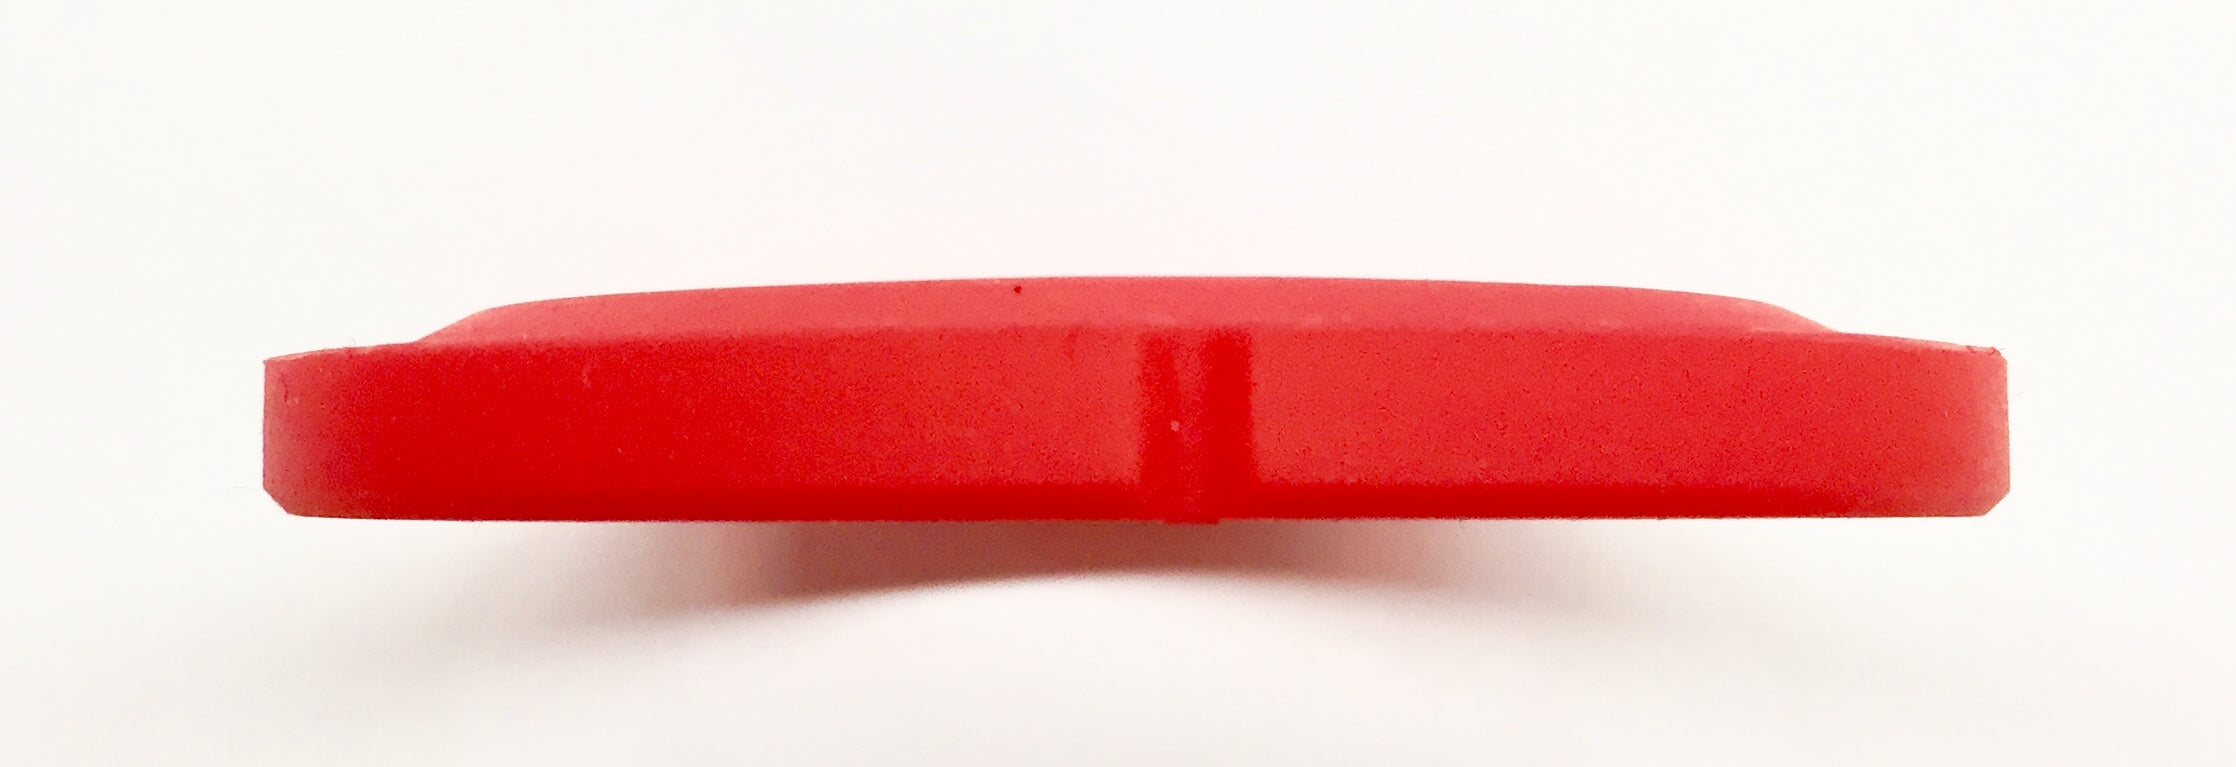 CAFFEWERKS Red Silicone Group Seal H8mm - La Marzocco/Slayer